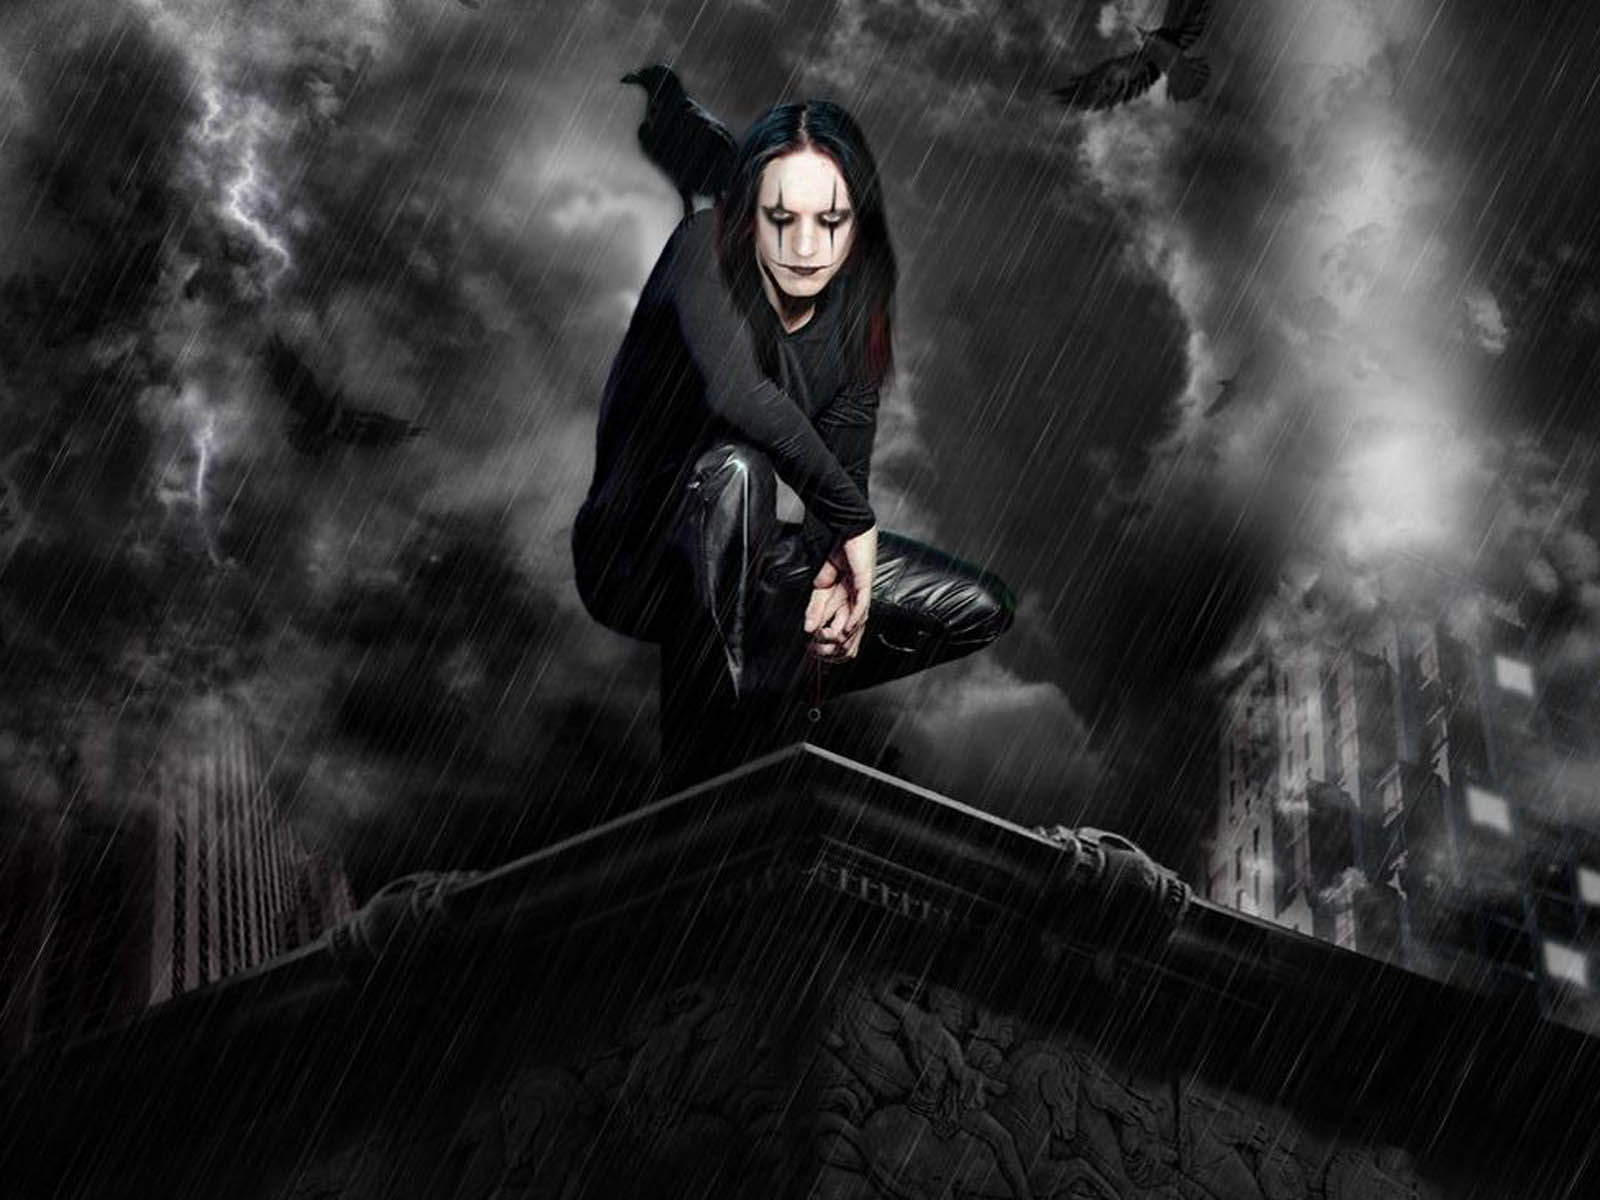 Tag Dark Gothic Wallpapers BackgroundsPhotos Pictures and Images 1600x1200